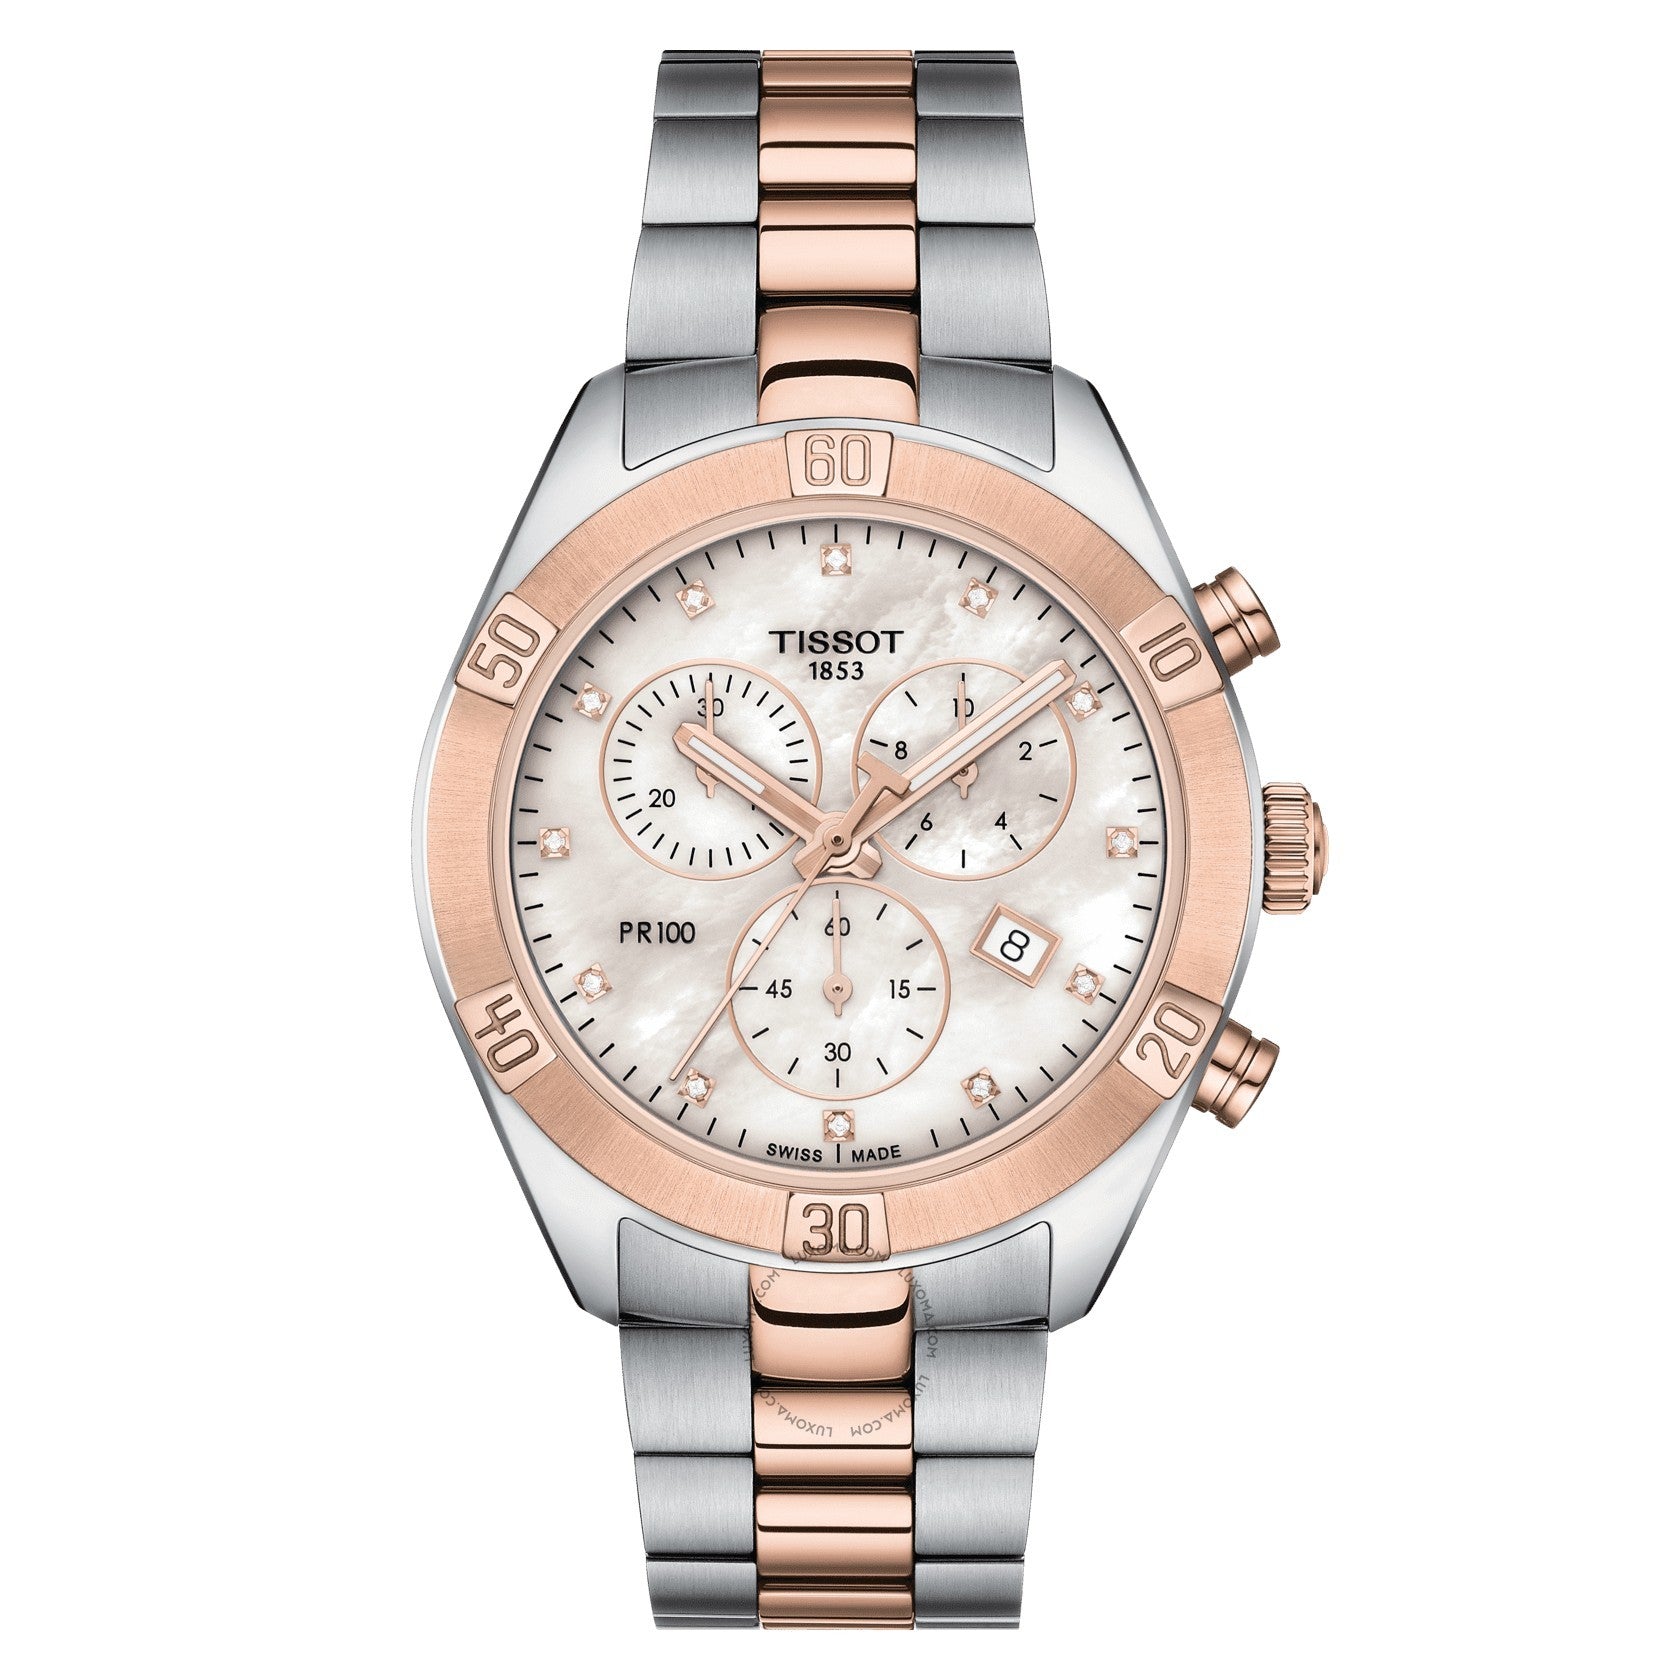 Tissot PR 100 Chronograph White Mother of Pearl Dial Ladies Watch T101.917.22.116.00